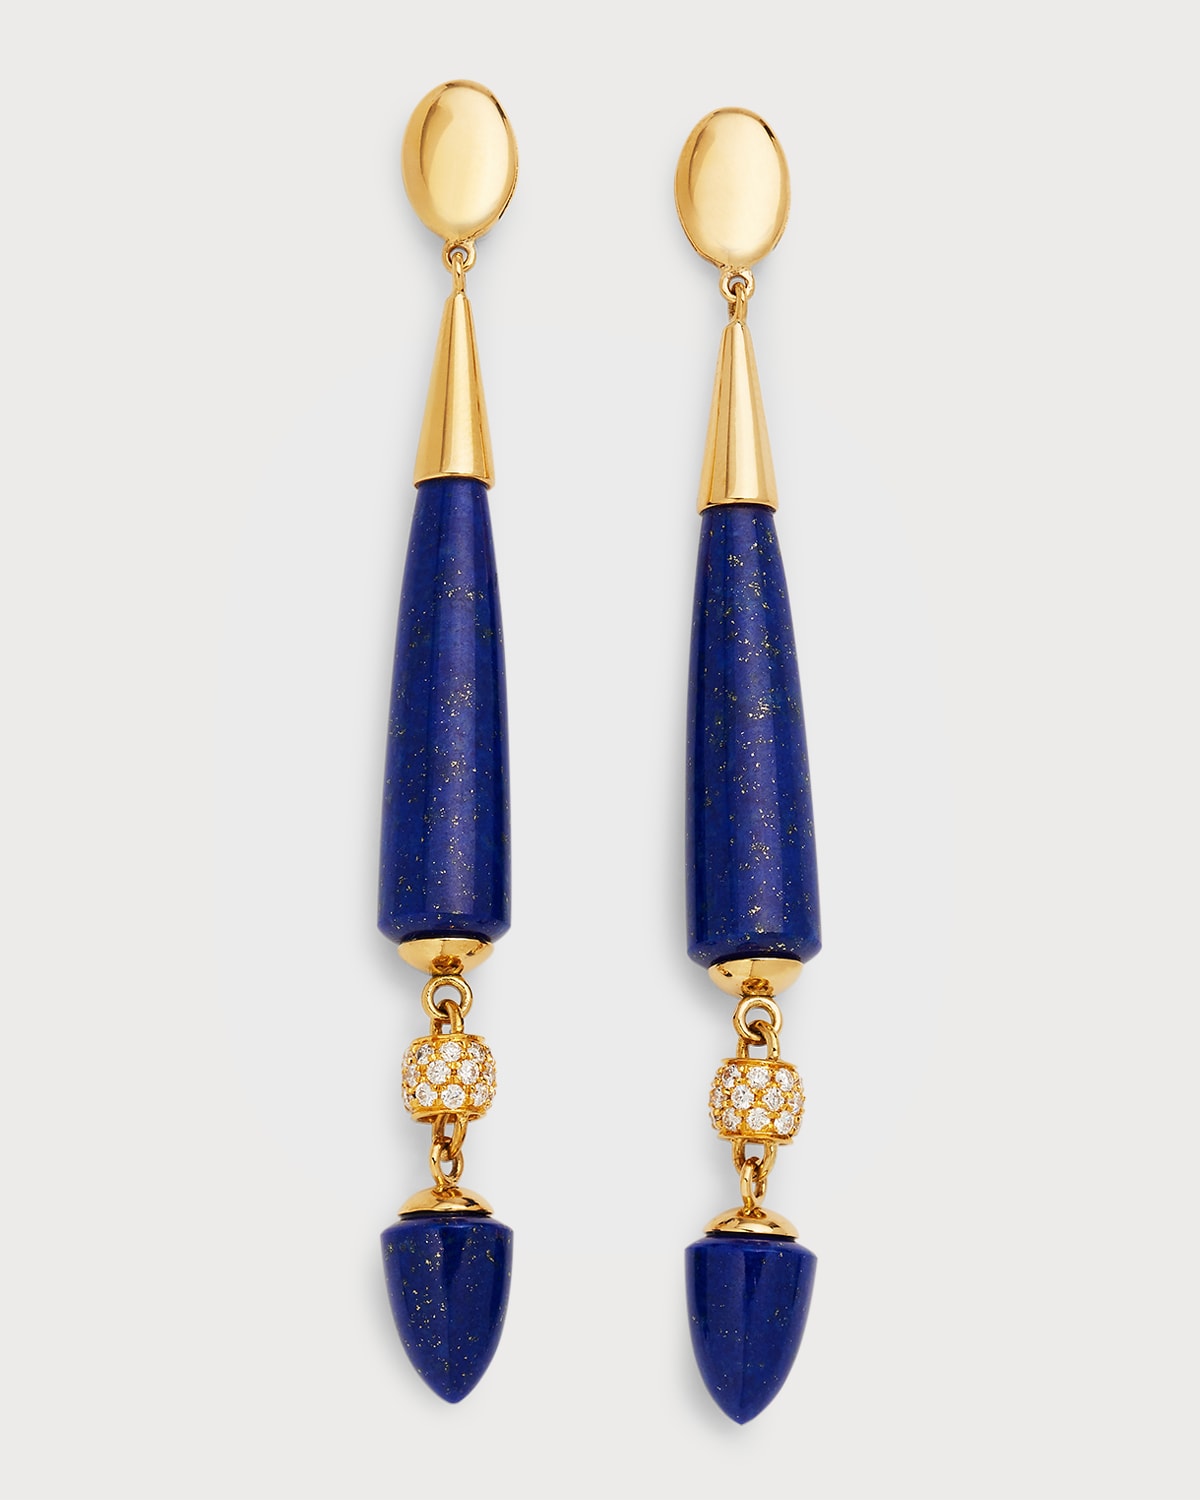 18K Yellow Gold Suzannah Earrings with Lapis Lazuli and Diamonds